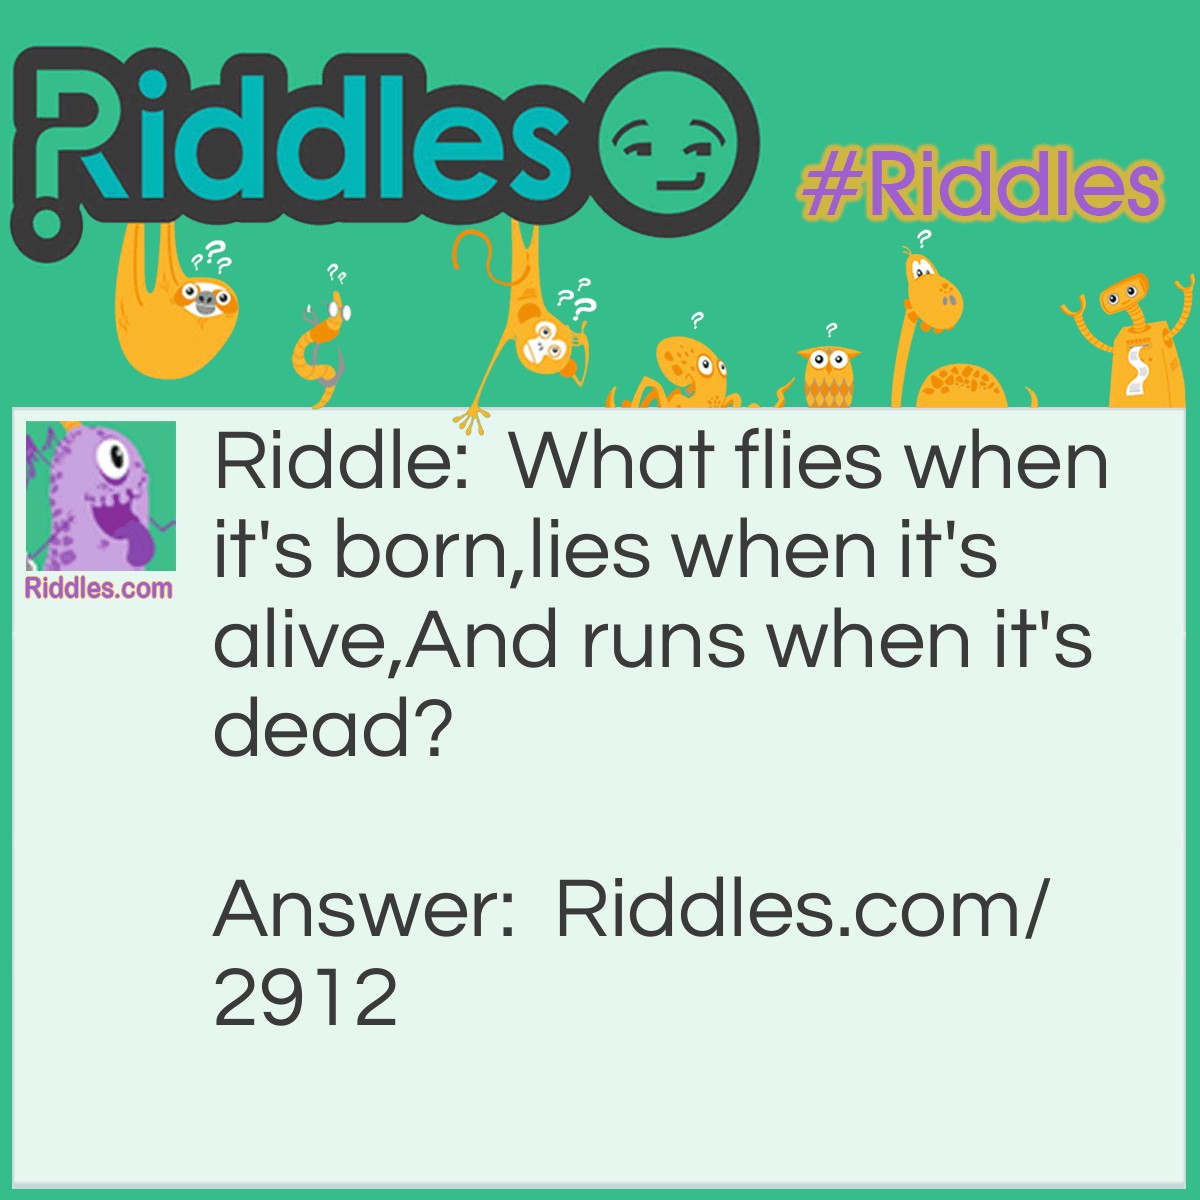 Riddle: What flies when it's born, lies when it's alive, And runs when it's dead? Answer: Leave guessed answer in the description below